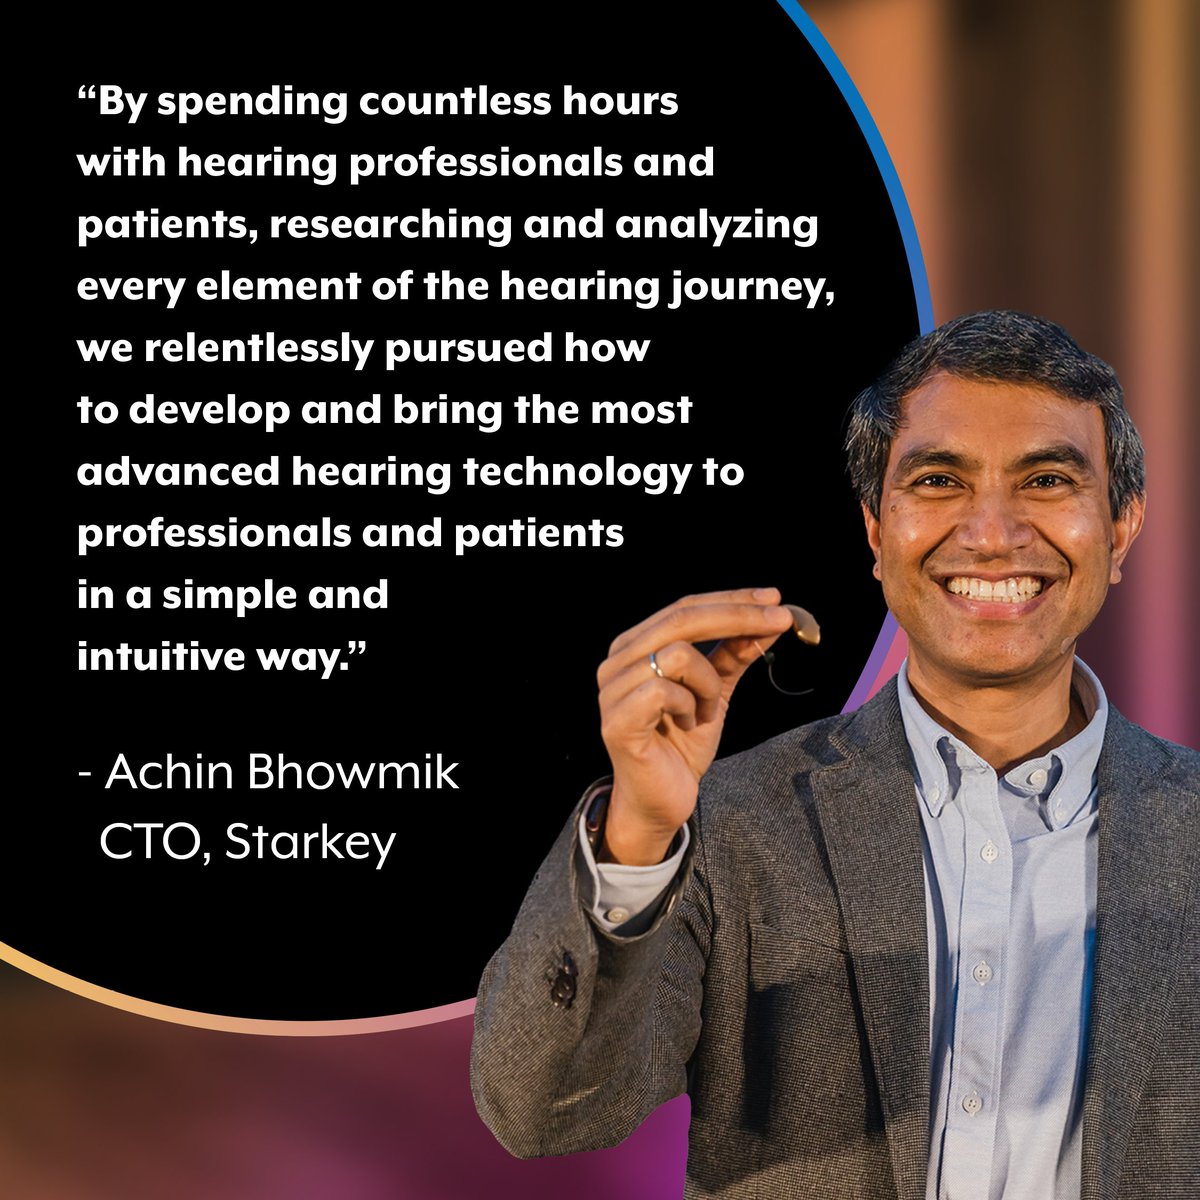 Achin Bhowmik, Ph.D., our visionary Chief Technology Officer and EVP of Engineering, shares the journey behind Starkey's Neuro Sound Technology to provide an unparalleled hearing experience.

#StarkeyMENA #HearingAidsSpecialist #HearingAids #HearingLoss #HearingLossAwareness